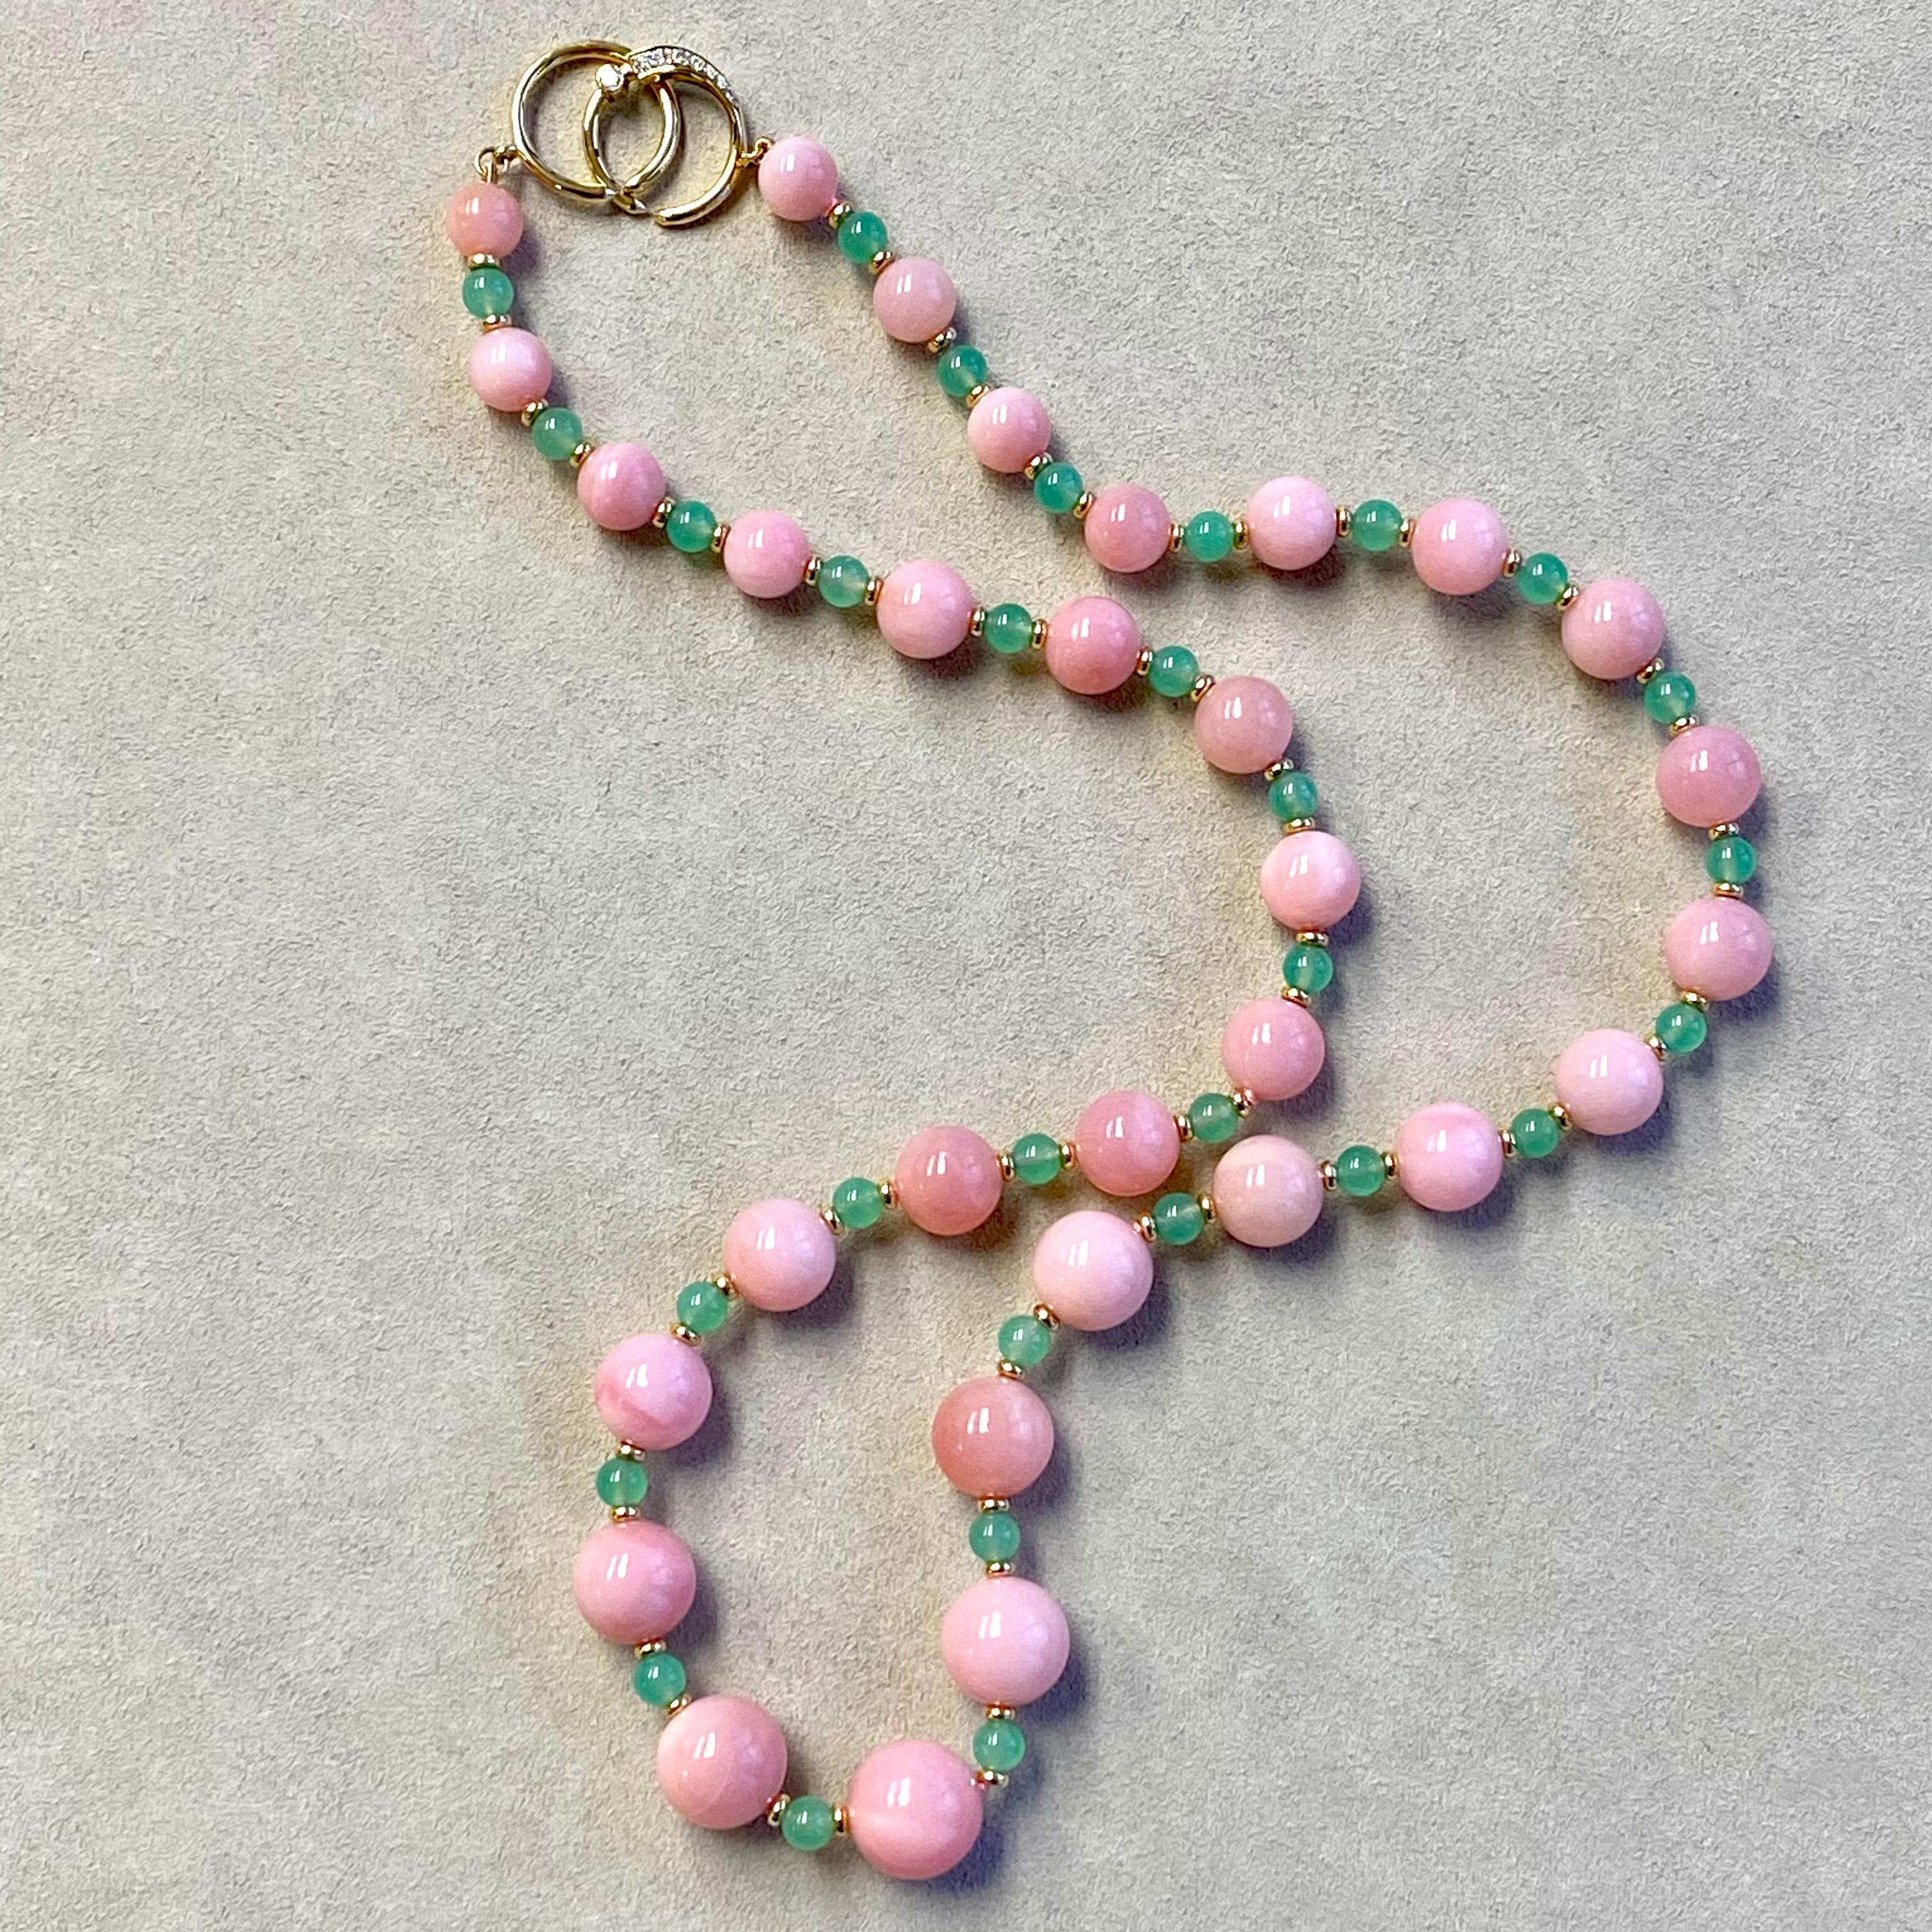 Created in 18 karat yellow gold
23 inch length
Pink Opal graduating beads  195 carats approx.
Chrysoprase beads 25 carats approx.
18kyg roundels 
18kyg circle clasp
Strung on silk
Limited edition

About the Designers

Drawing inspiration from little